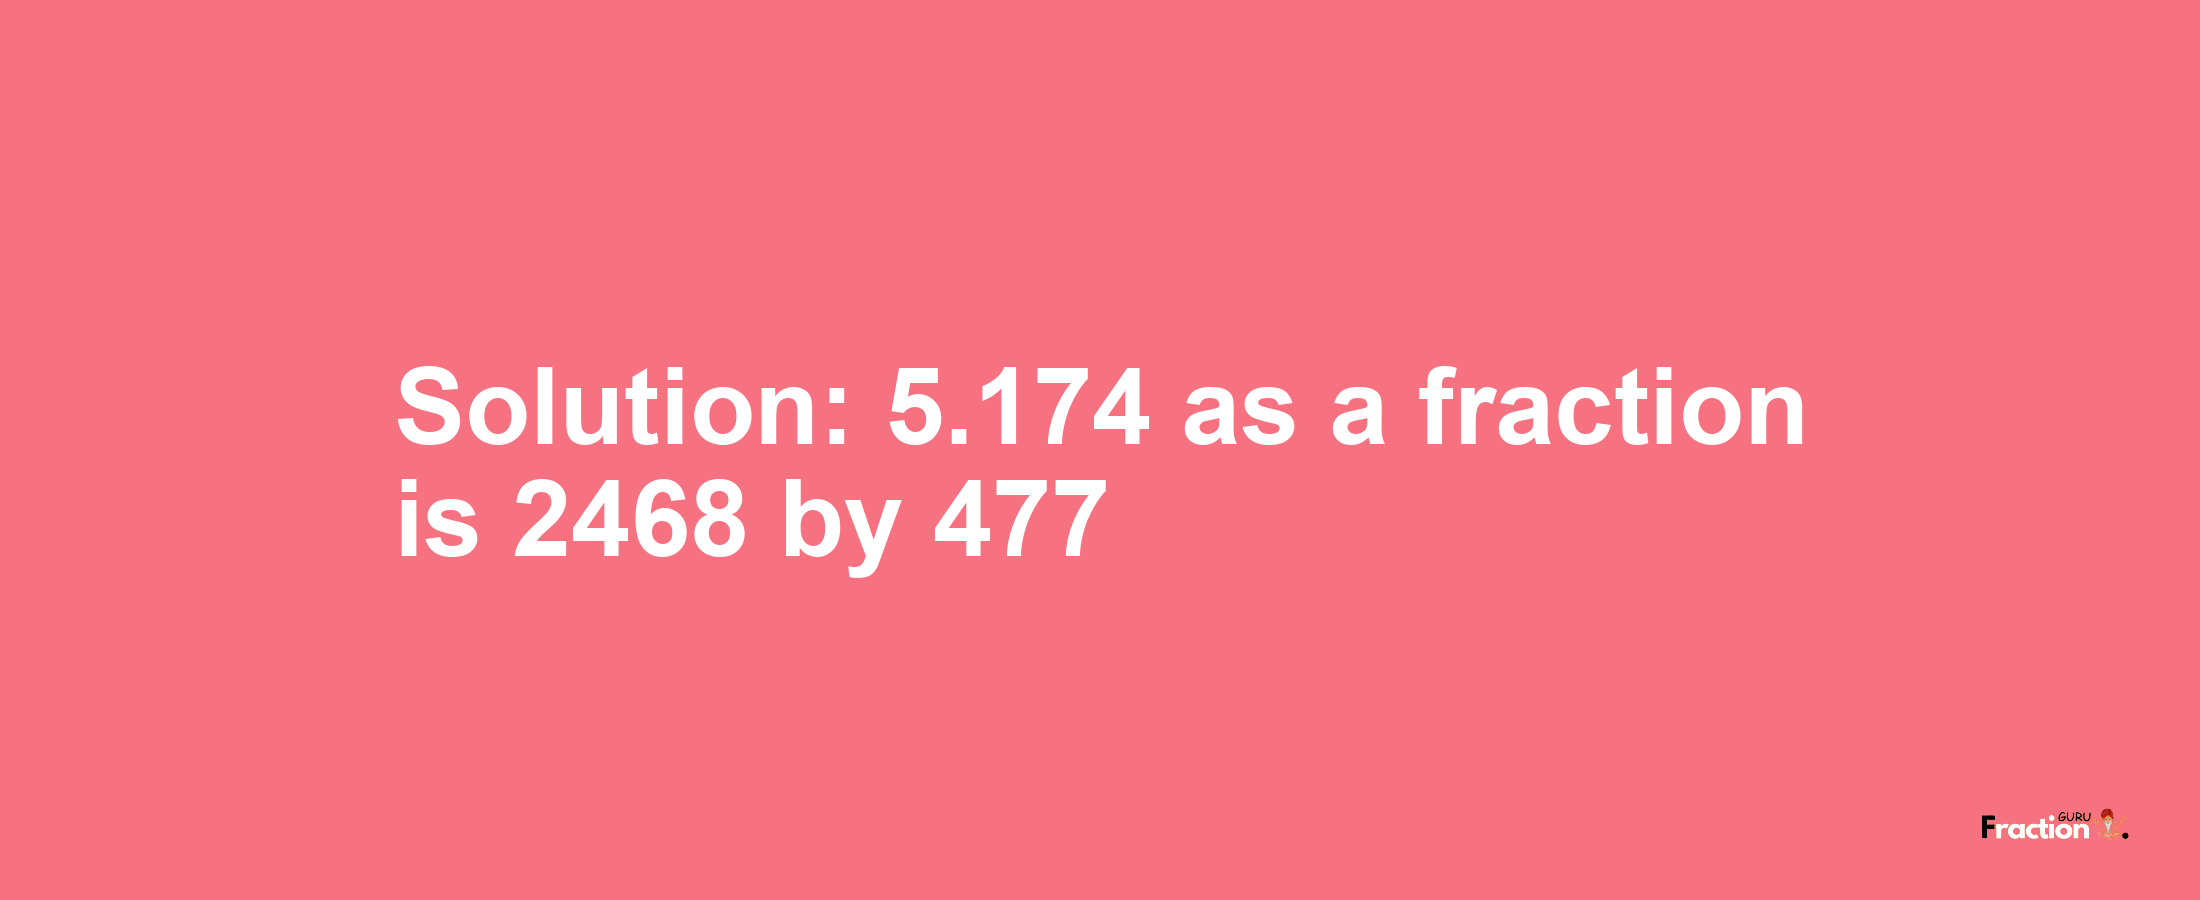 Solution:5.174 as a fraction is 2468/477